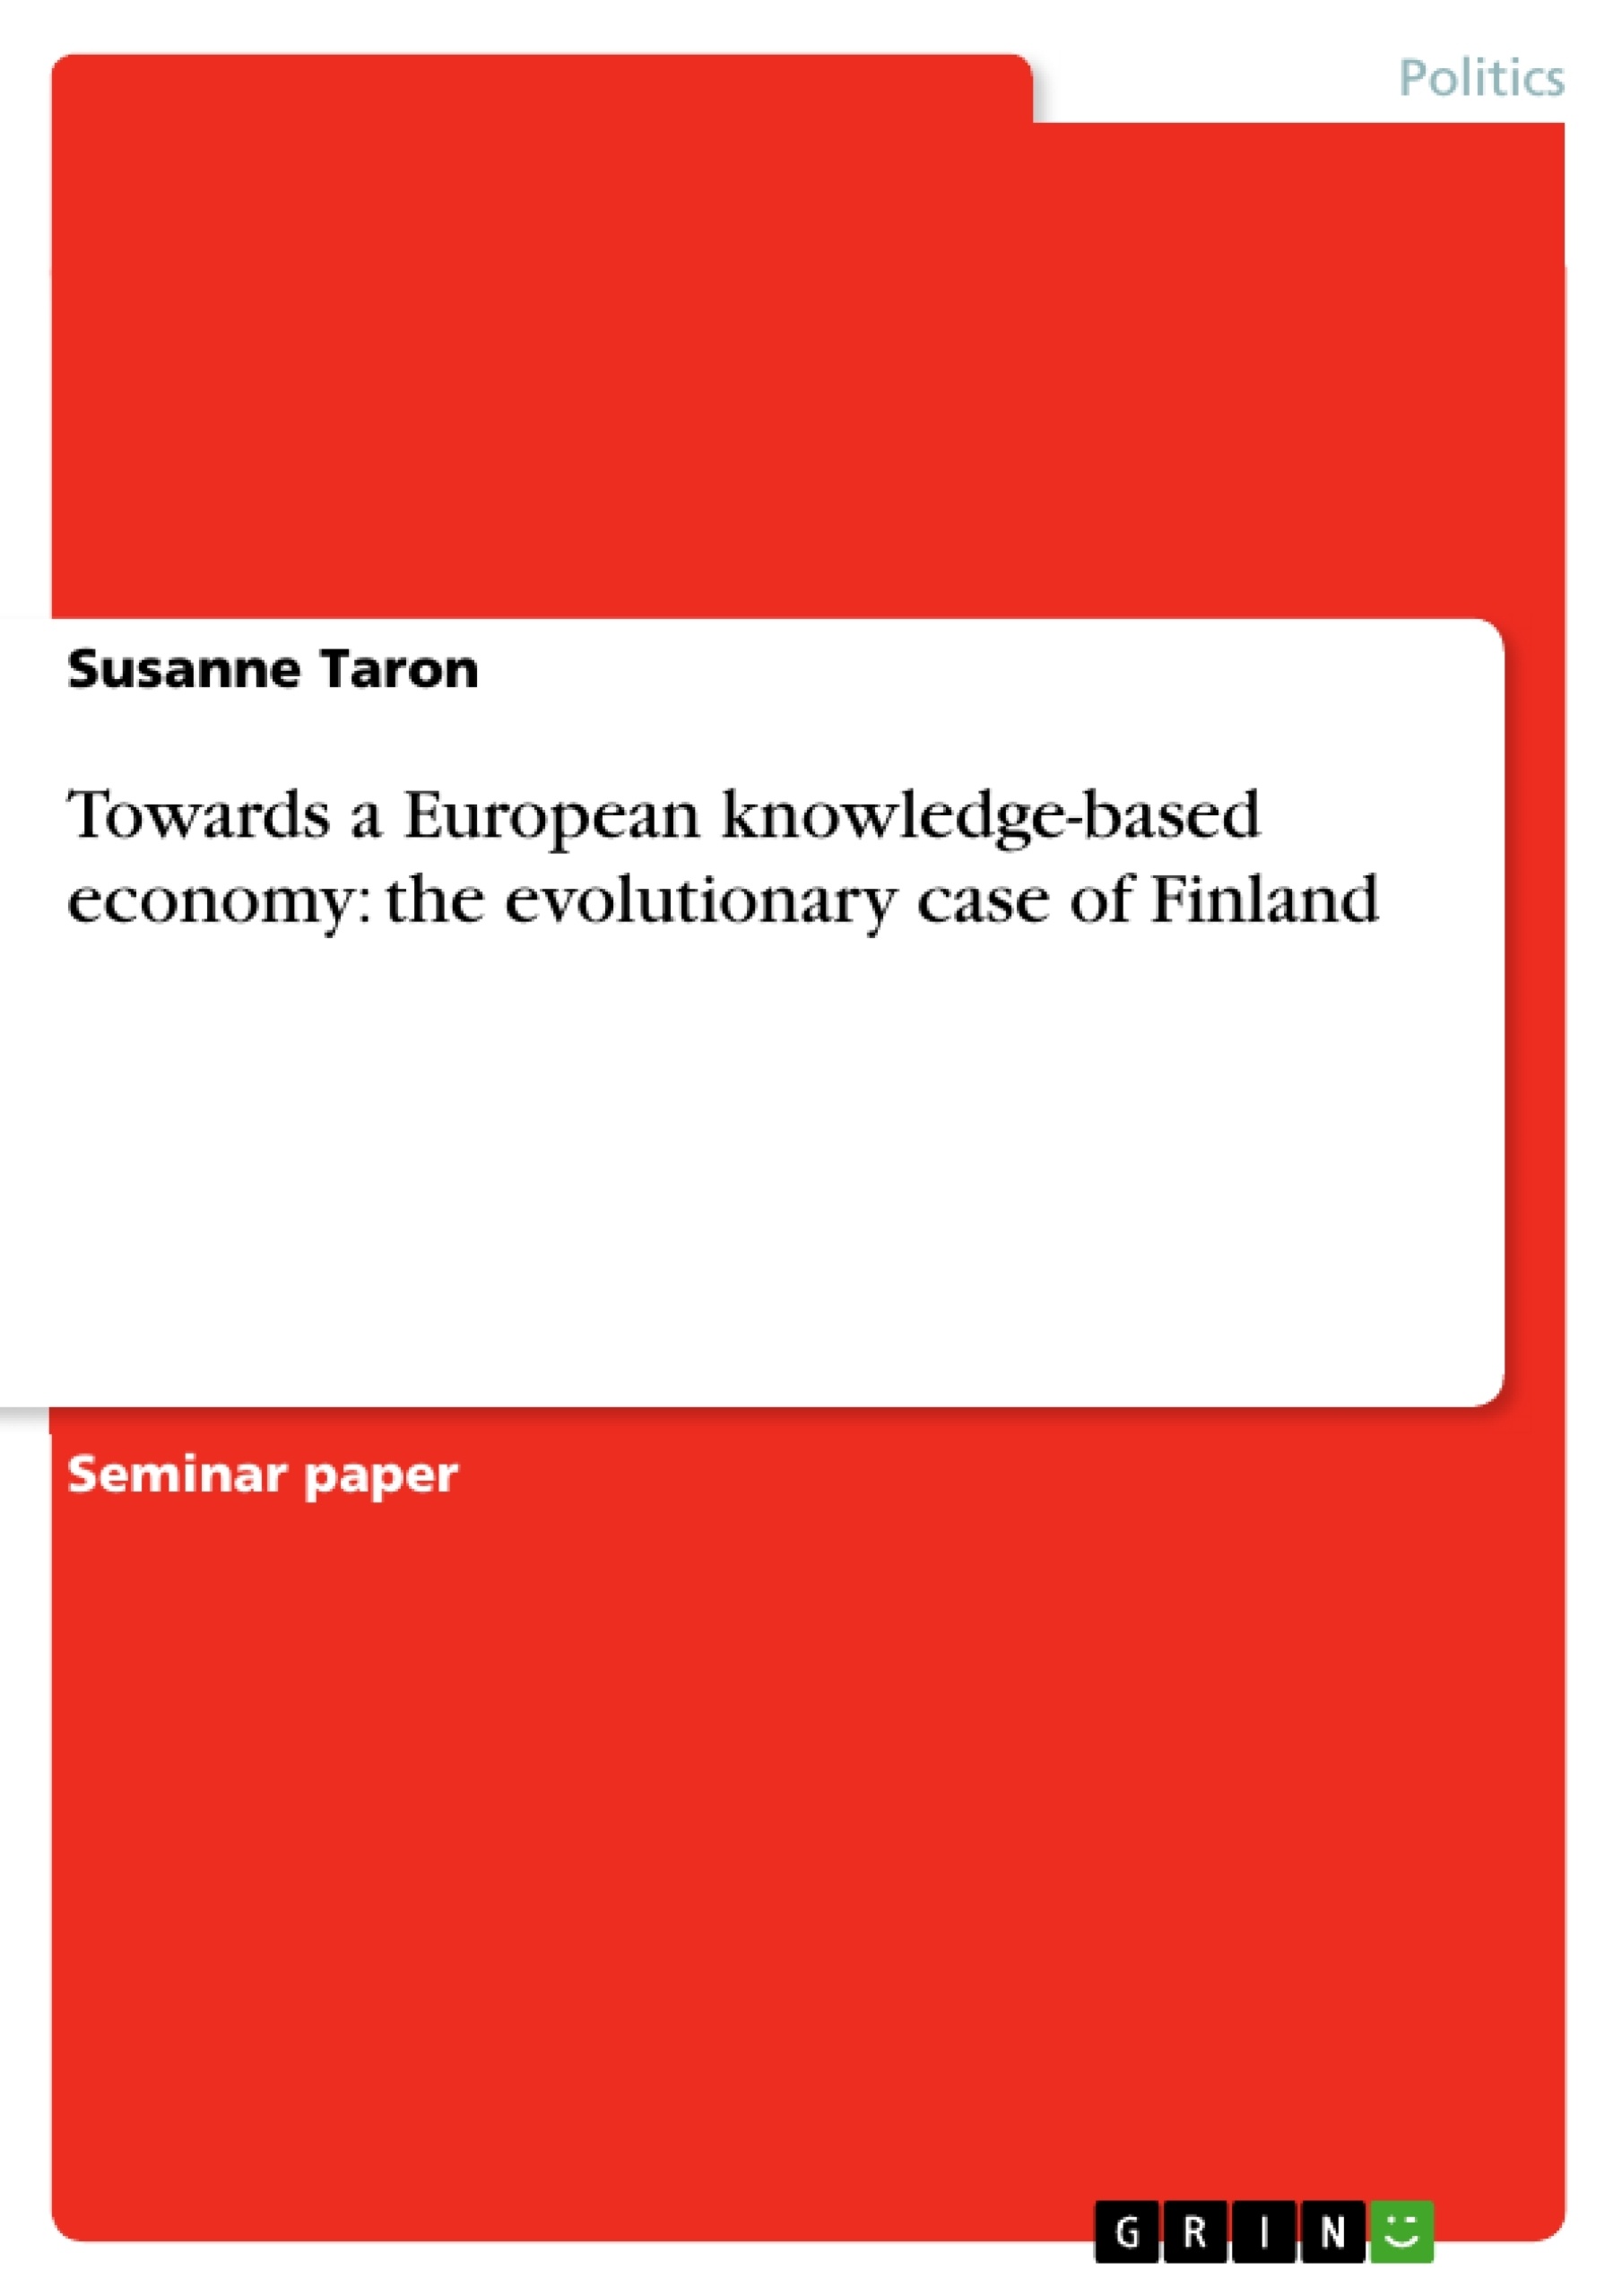 Title: Towards a European knowledge-based economy: the evolutionary case of Finland